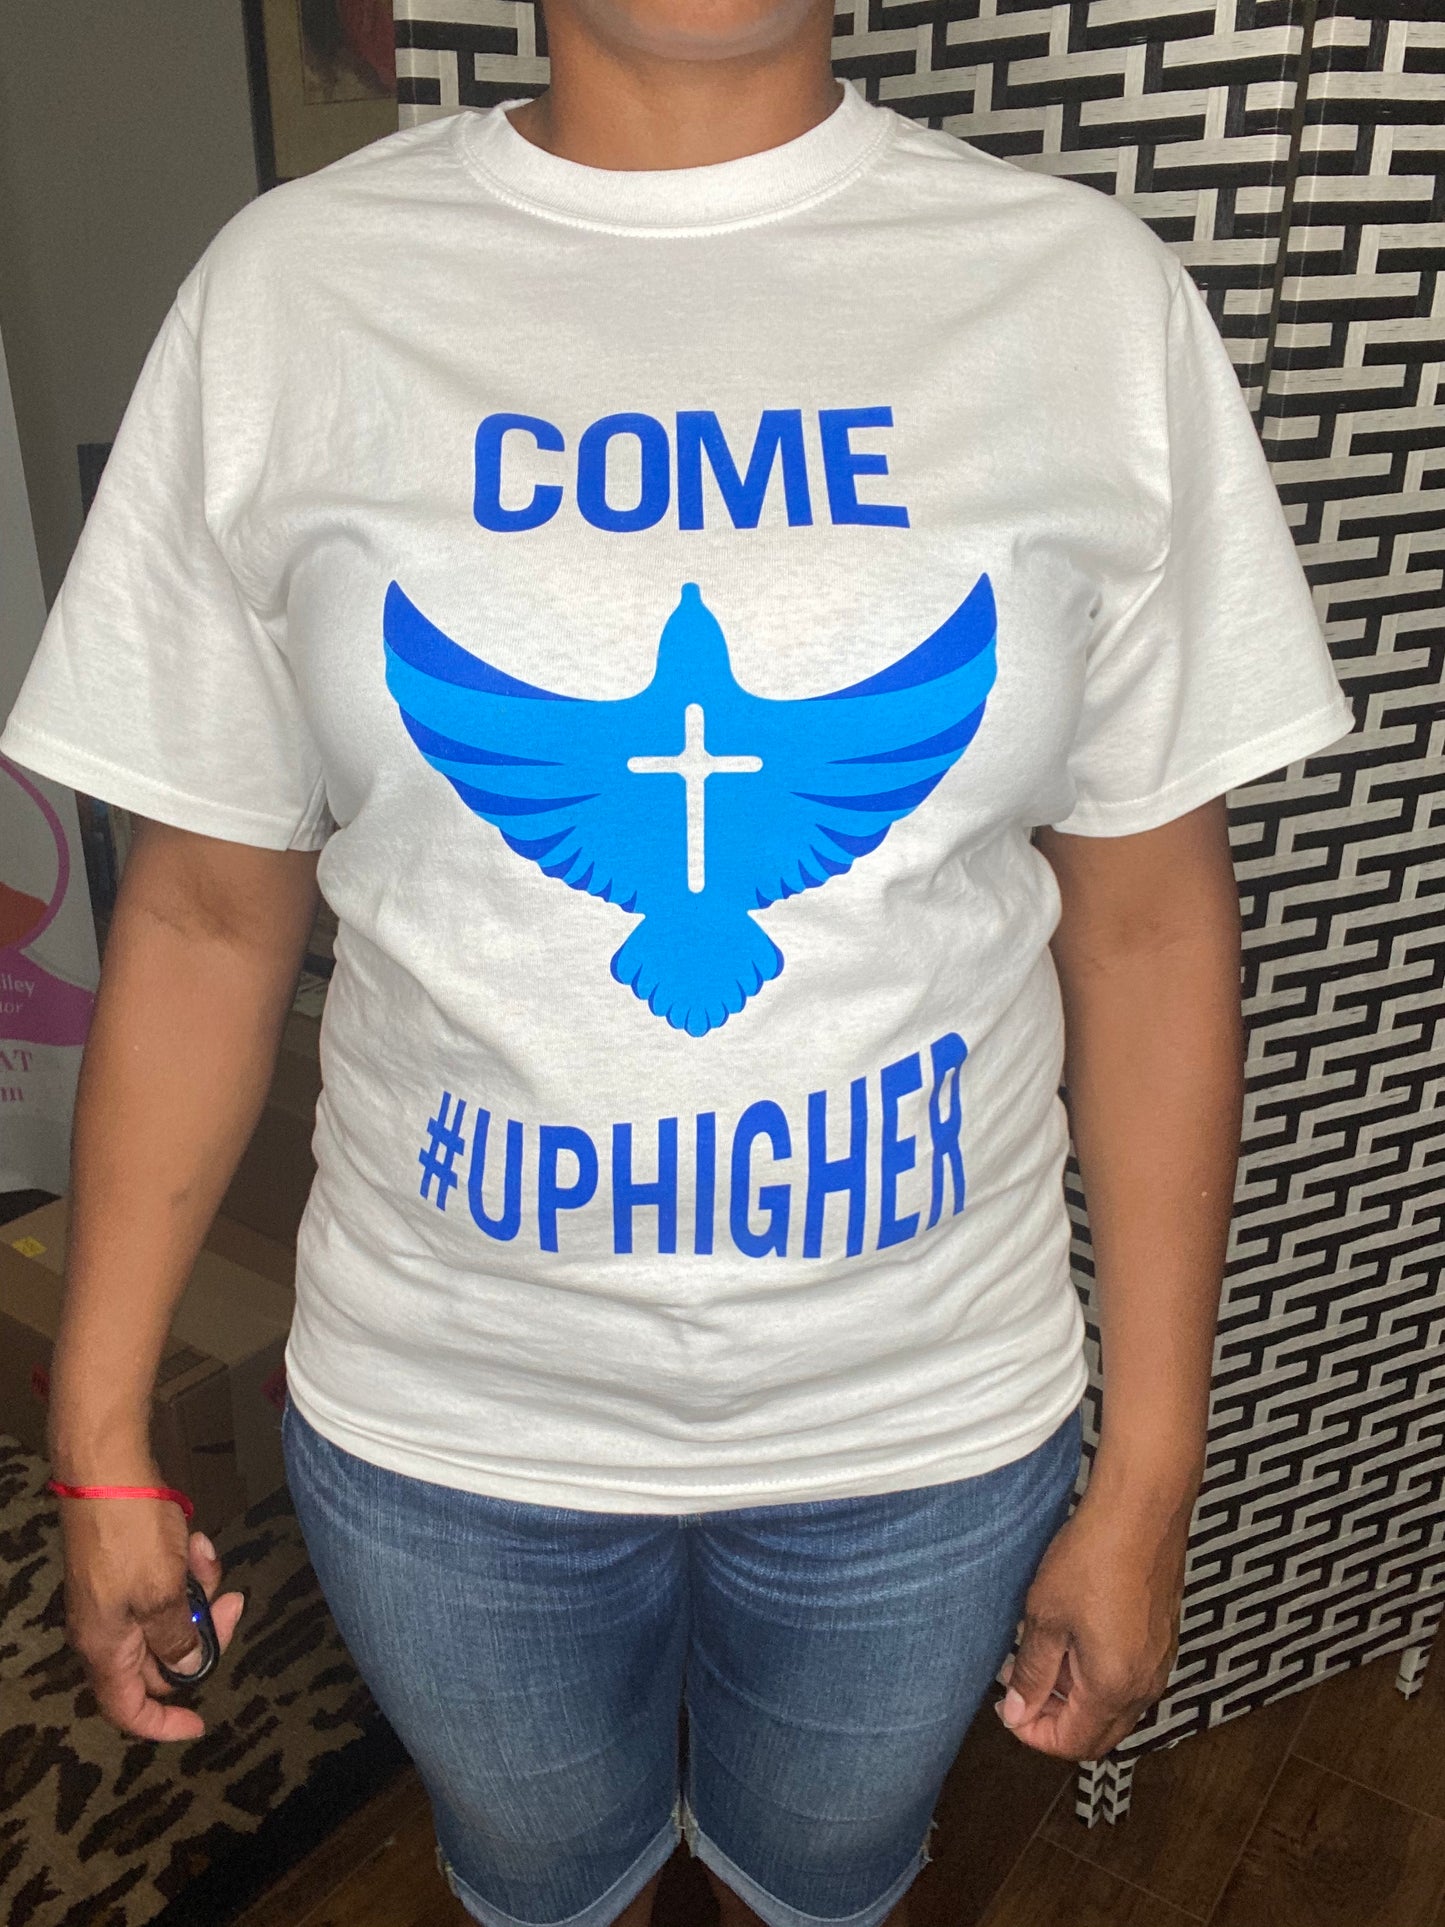 Come #Uphigher  Round-Neck T-Shirt